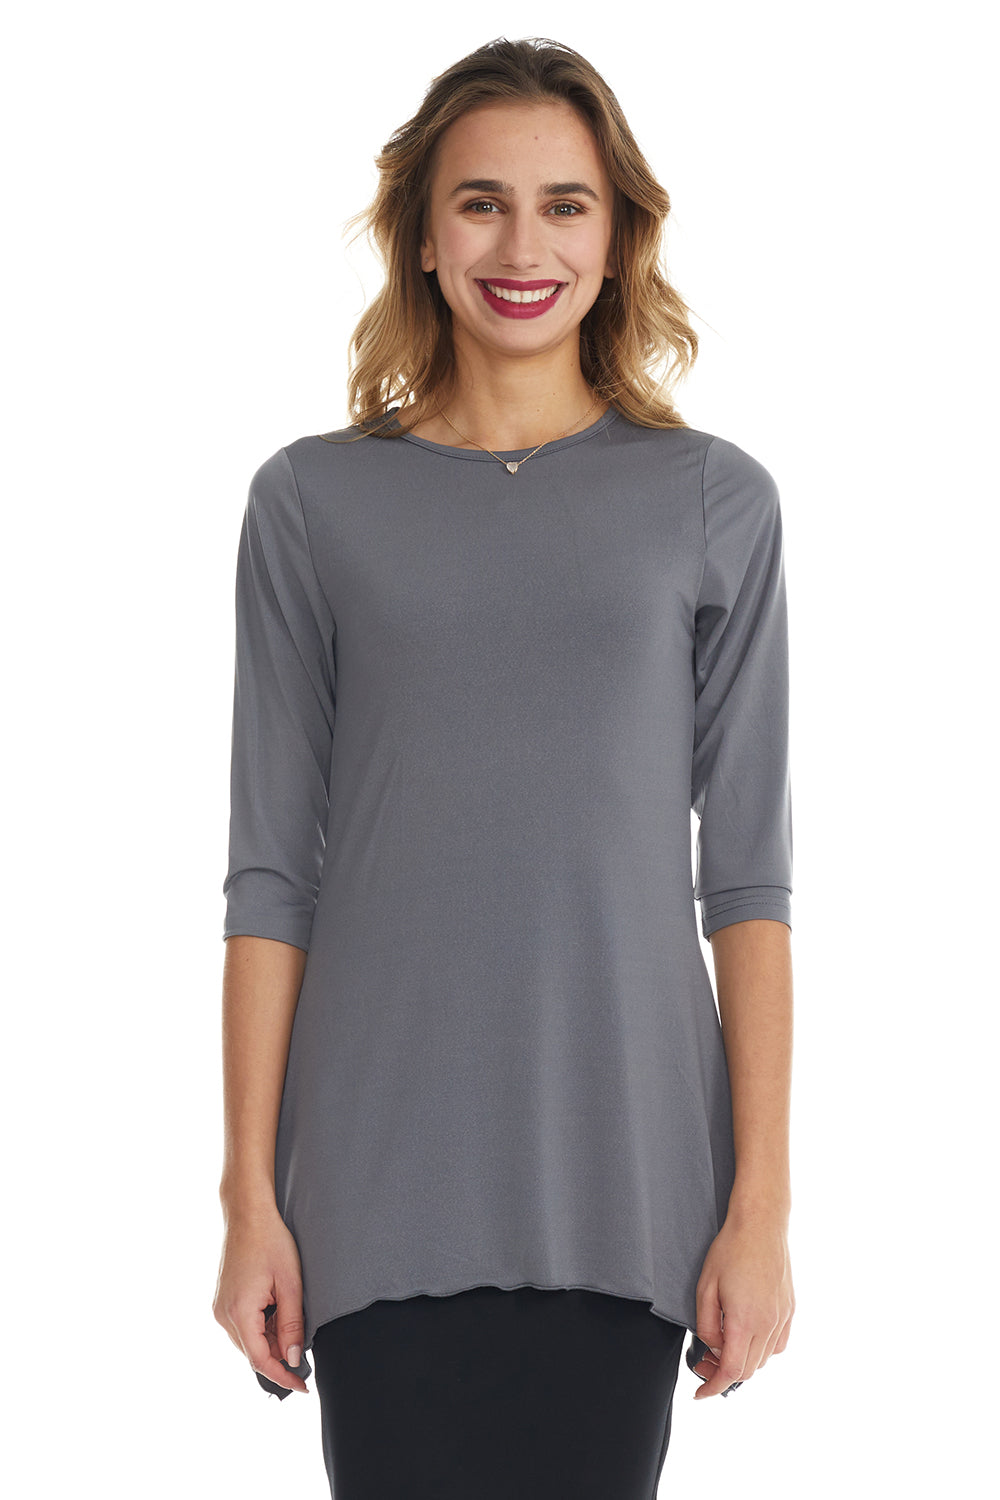 dark gray silky tunic top to wear with a skirt